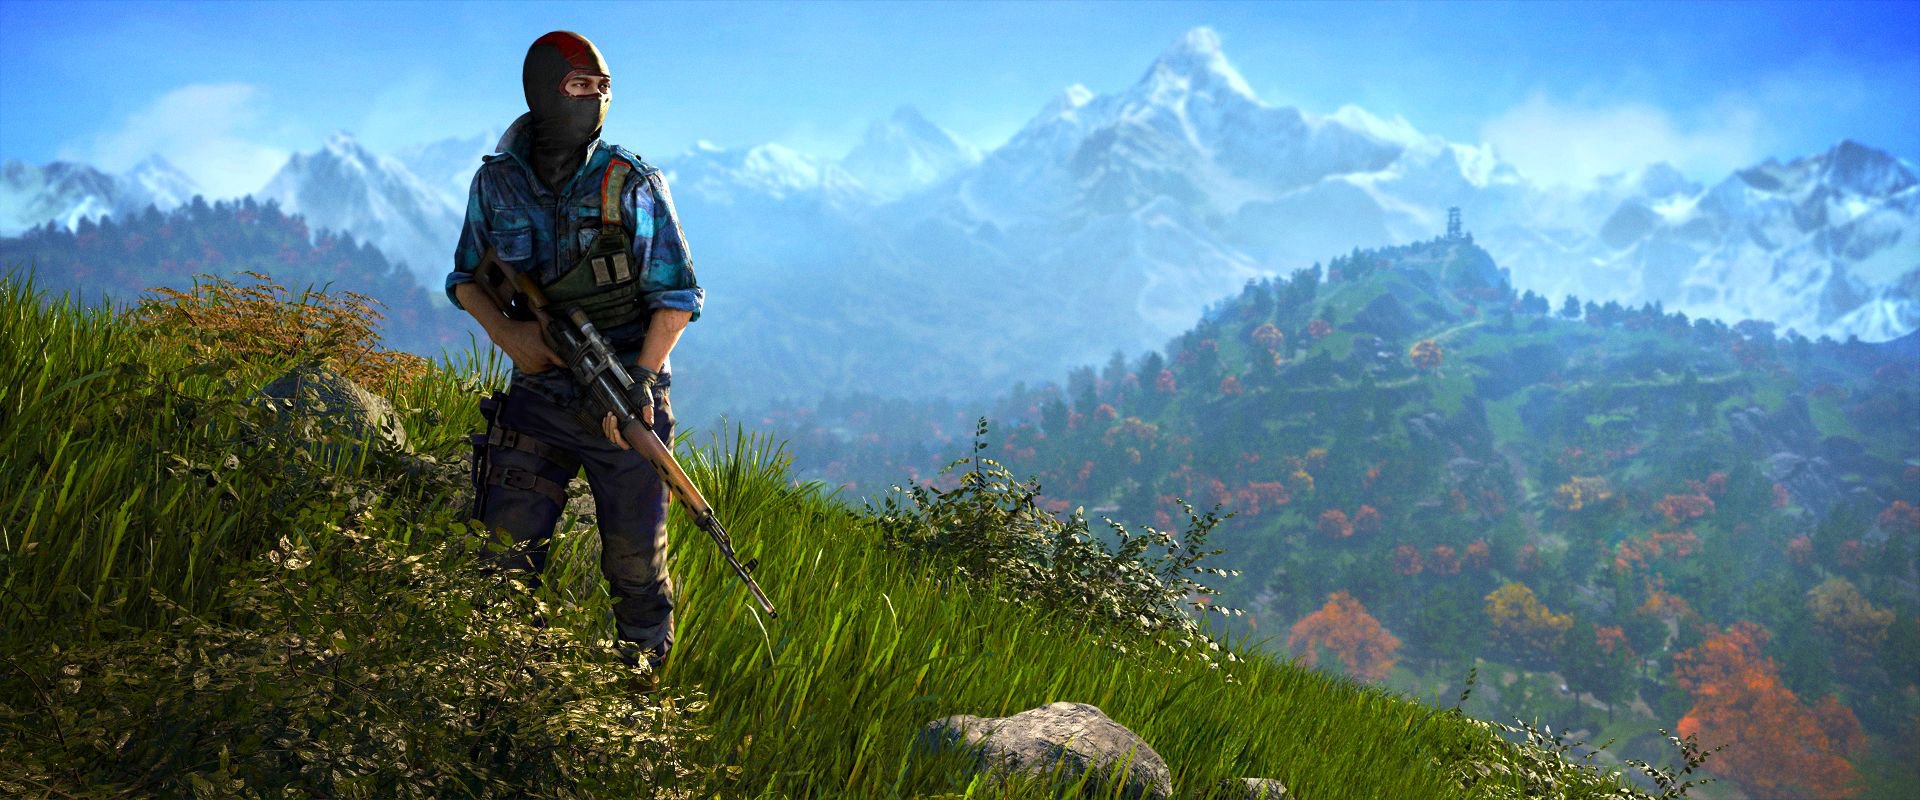 Far Cry 4 Wallpaper and Background Image | 1920x800 | ID:532566